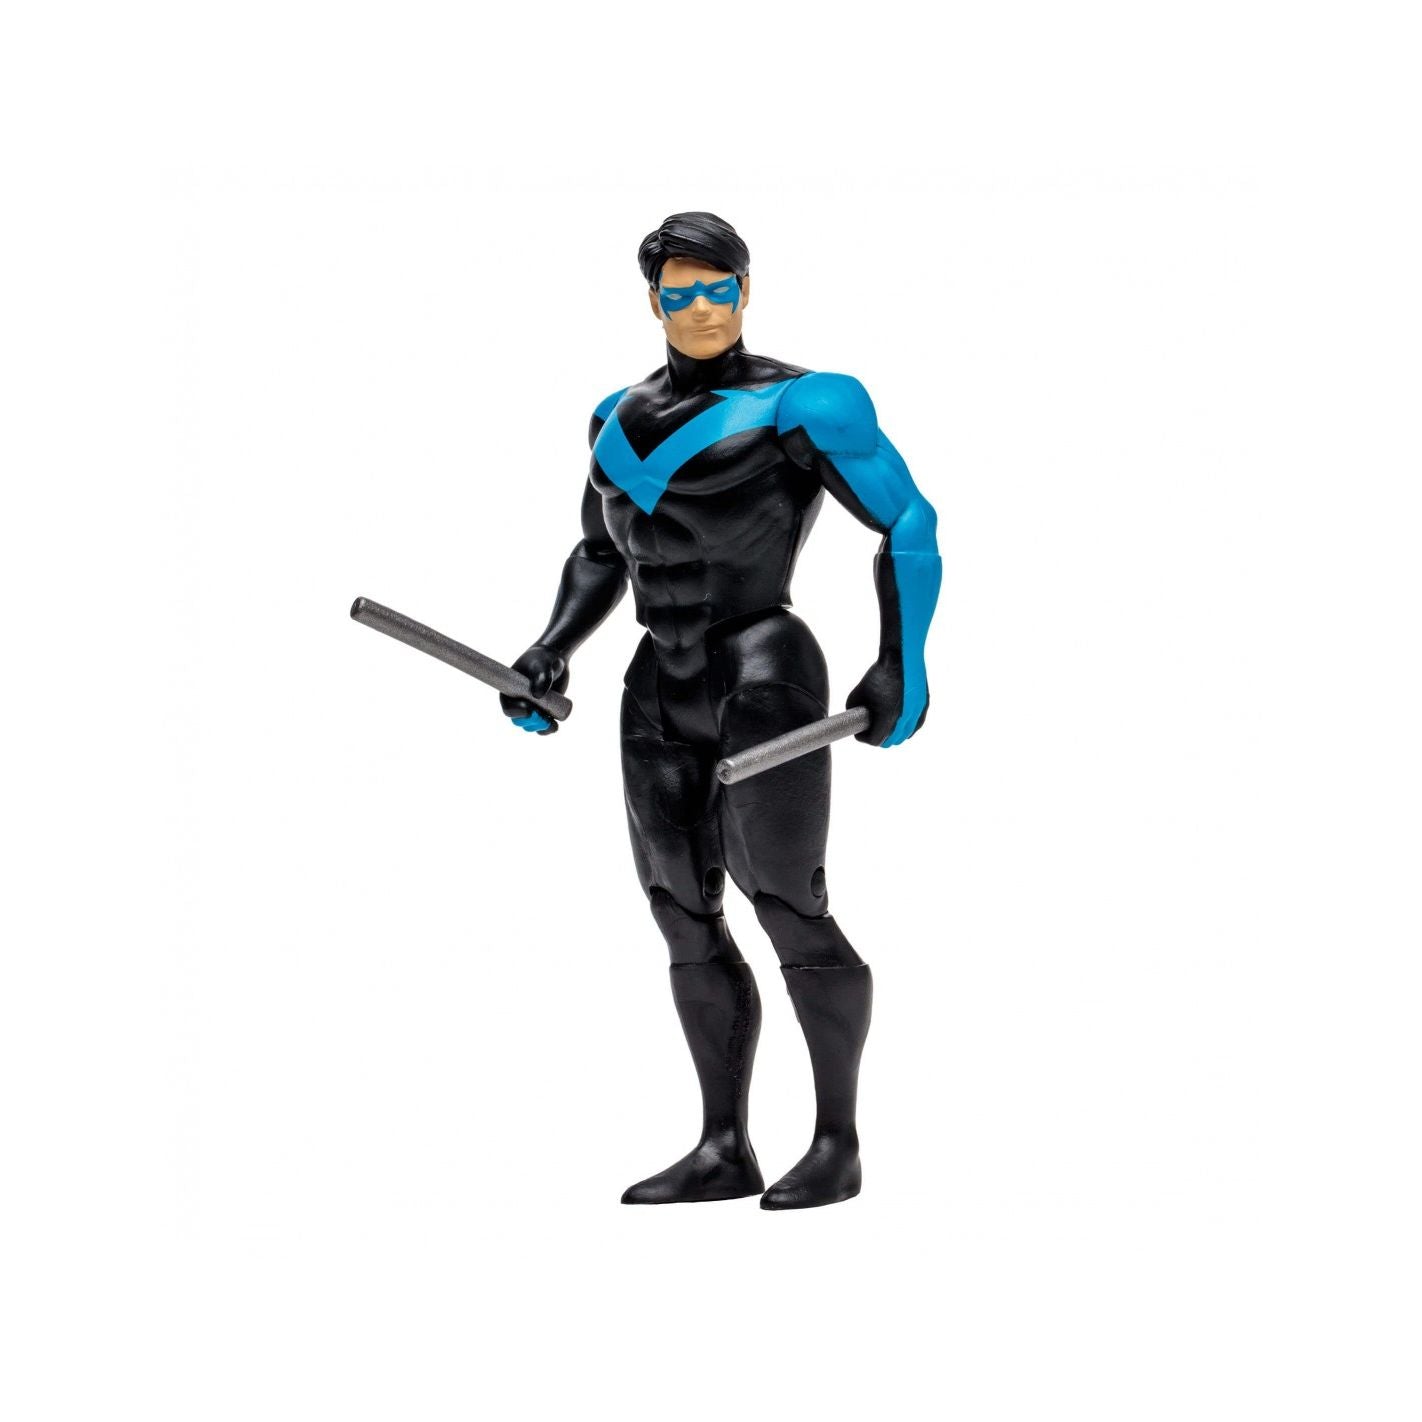 DC Direct Super Powers 5IN Figures WV3 - Nightwing (Hush) Action Figure Toy